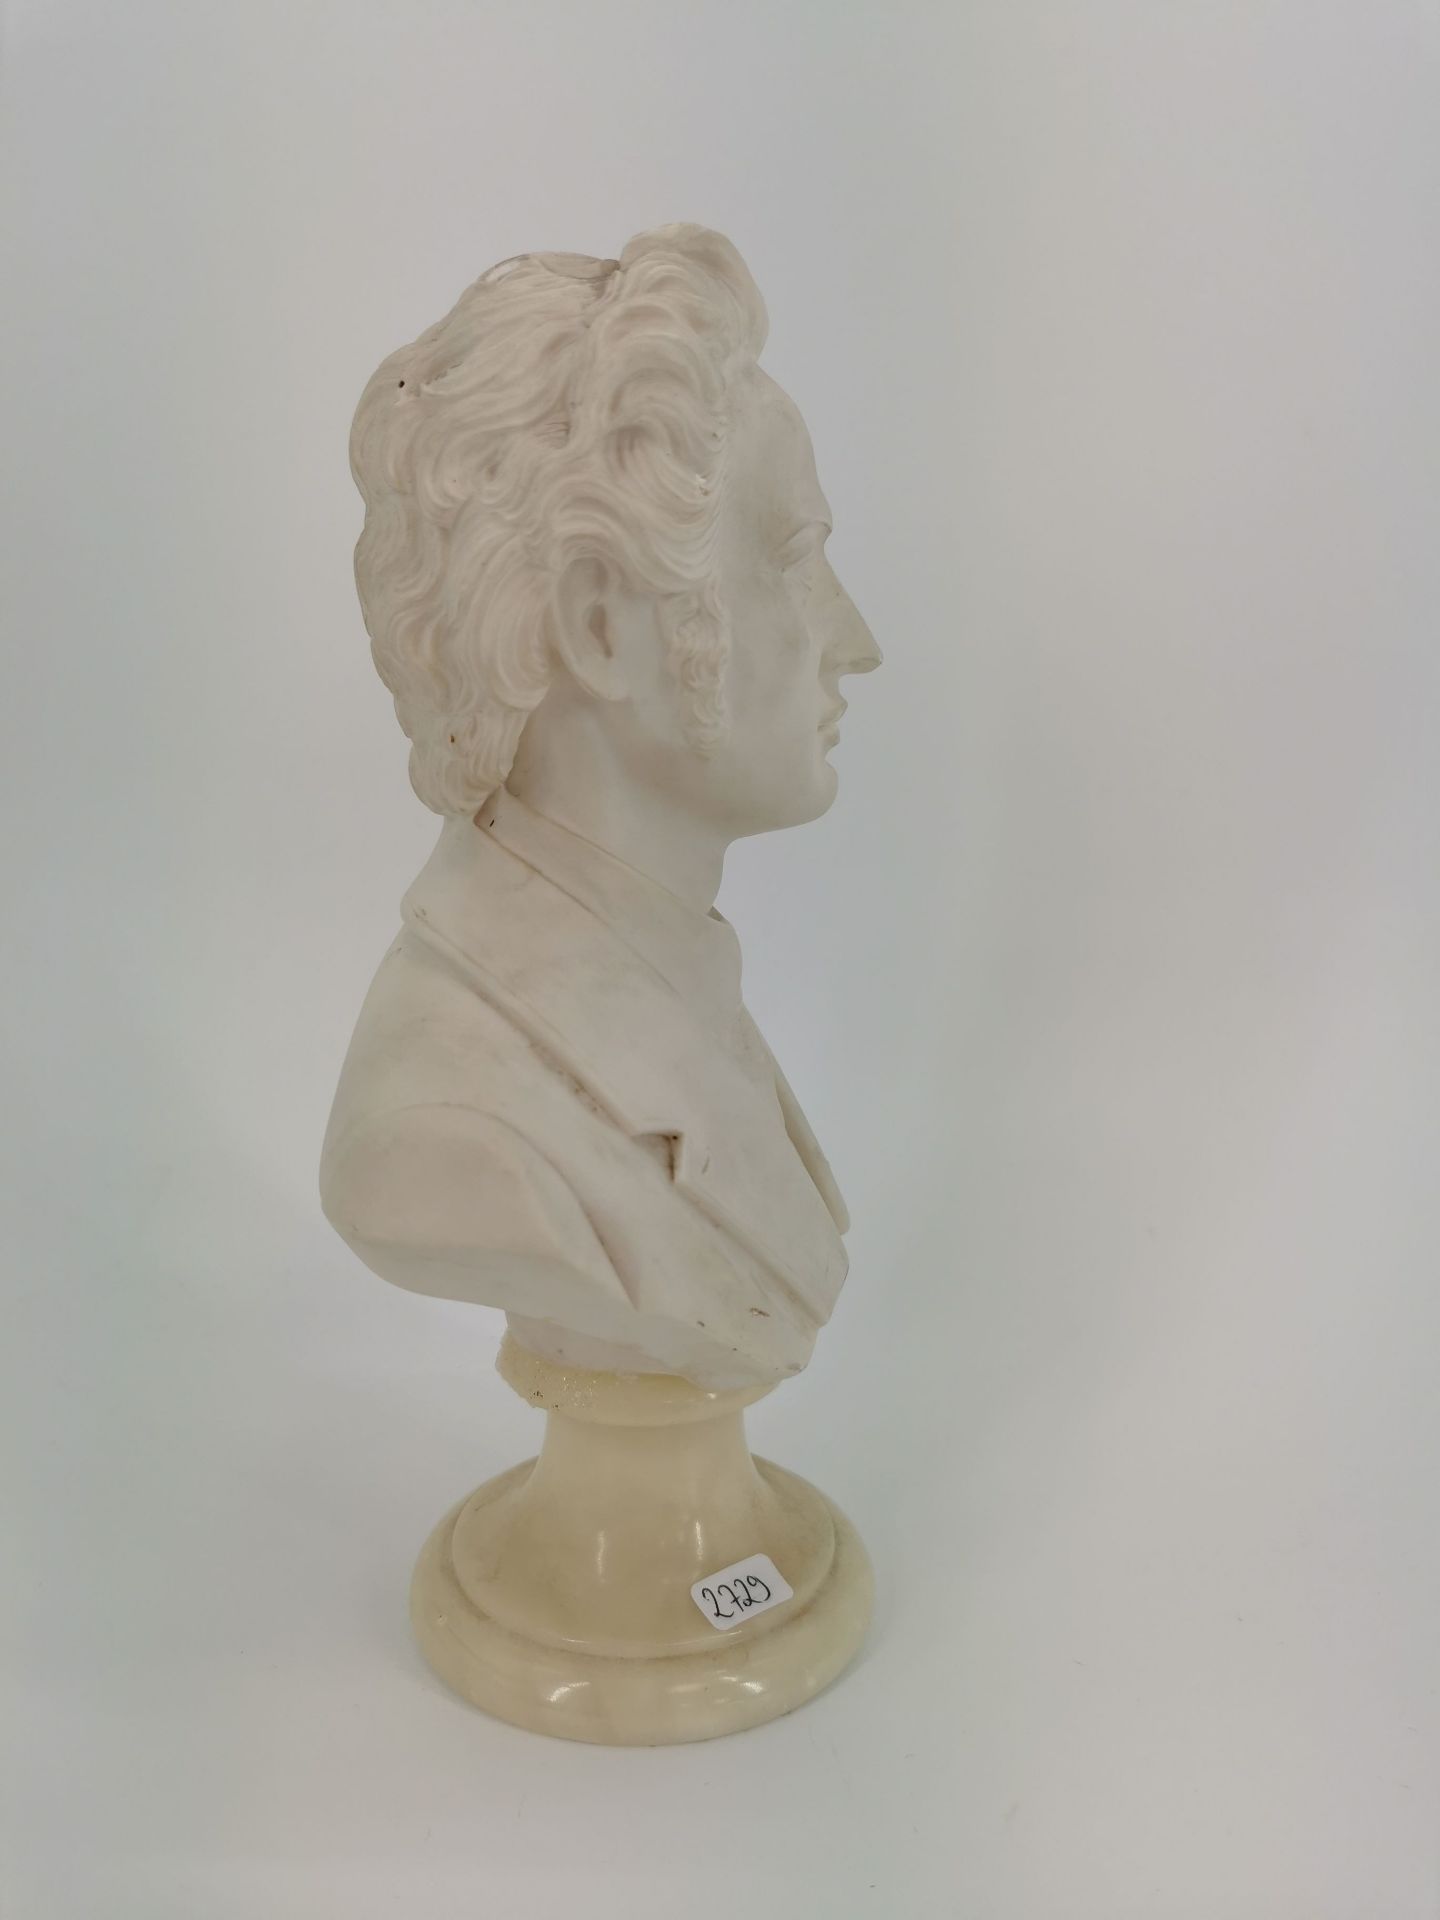 BUST "CHOPIN" - Image 2 of 6